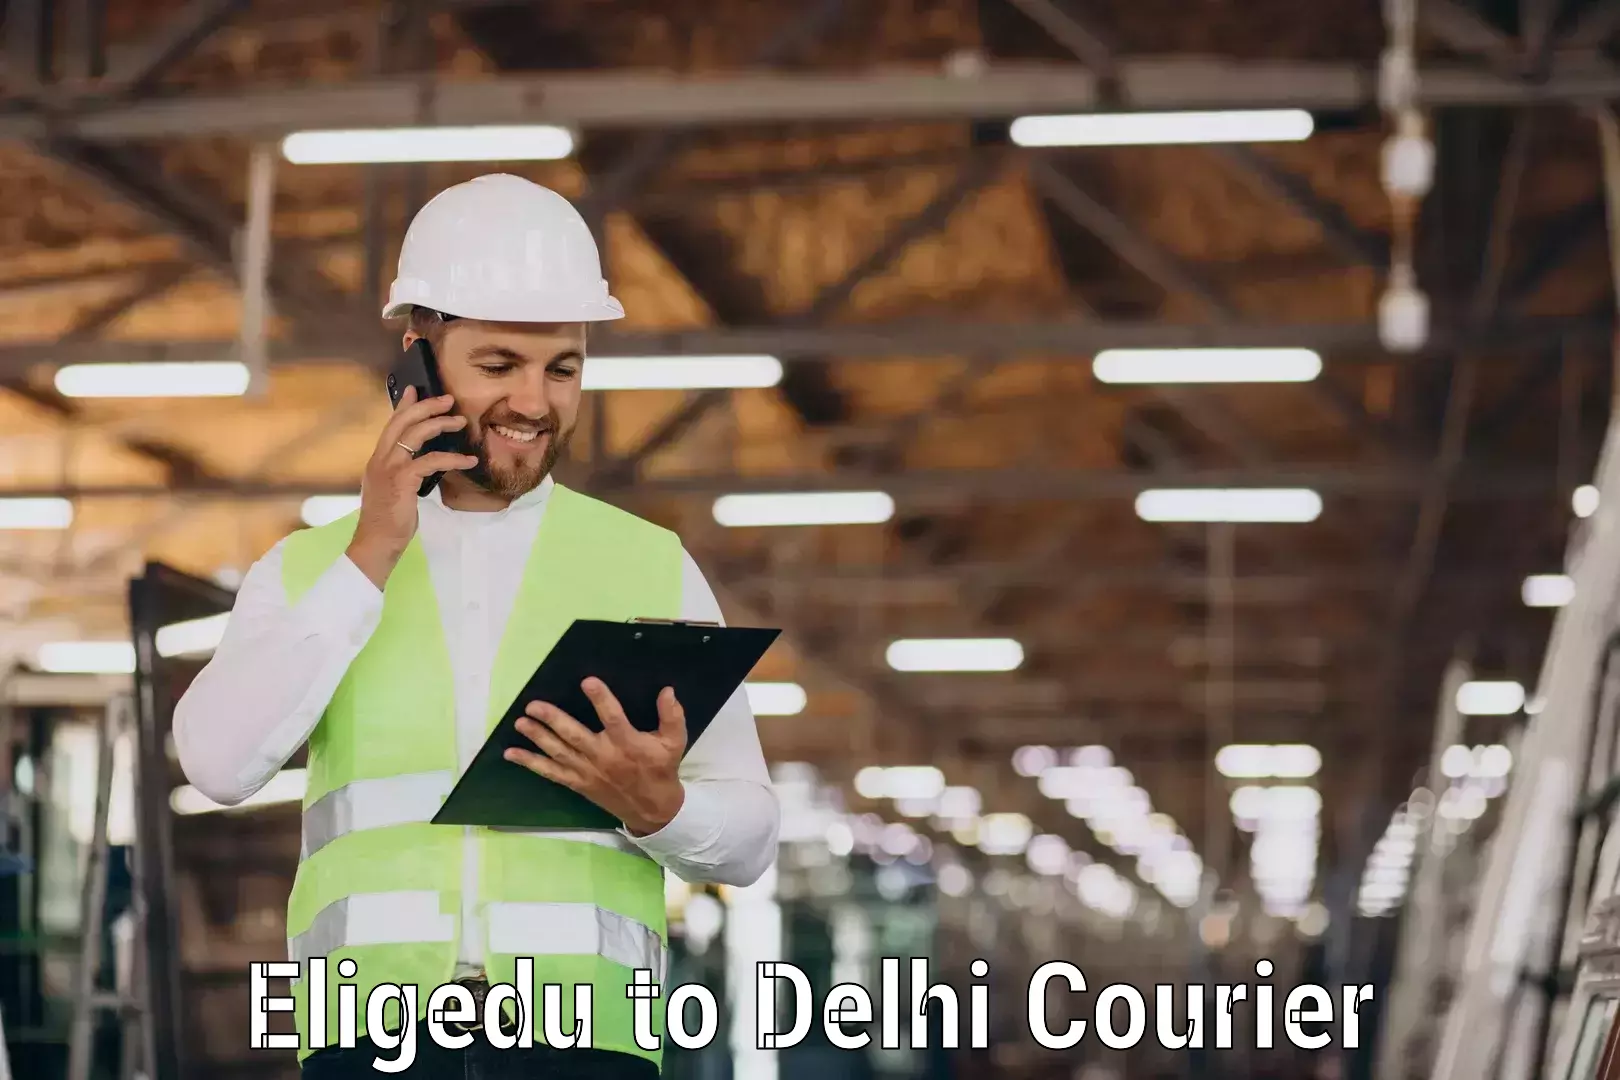 Express postal services in Eligedu to University of Delhi